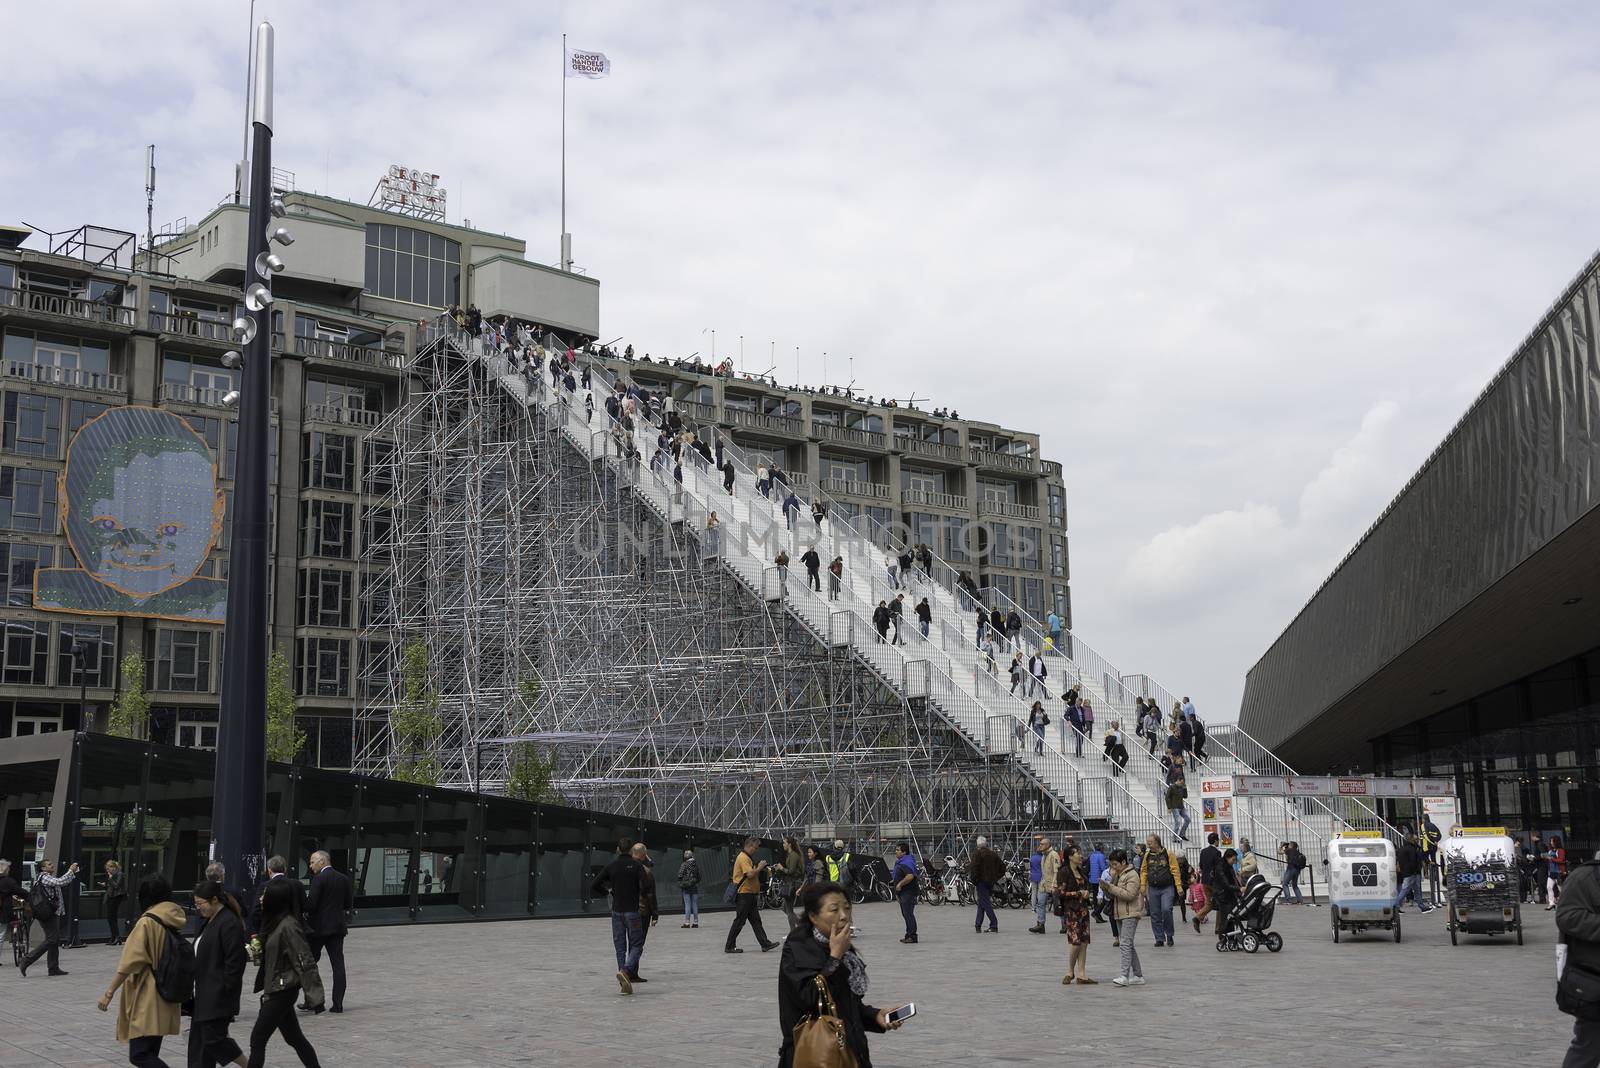 Rotterdam giant scaffolding staircase by compuinfoto